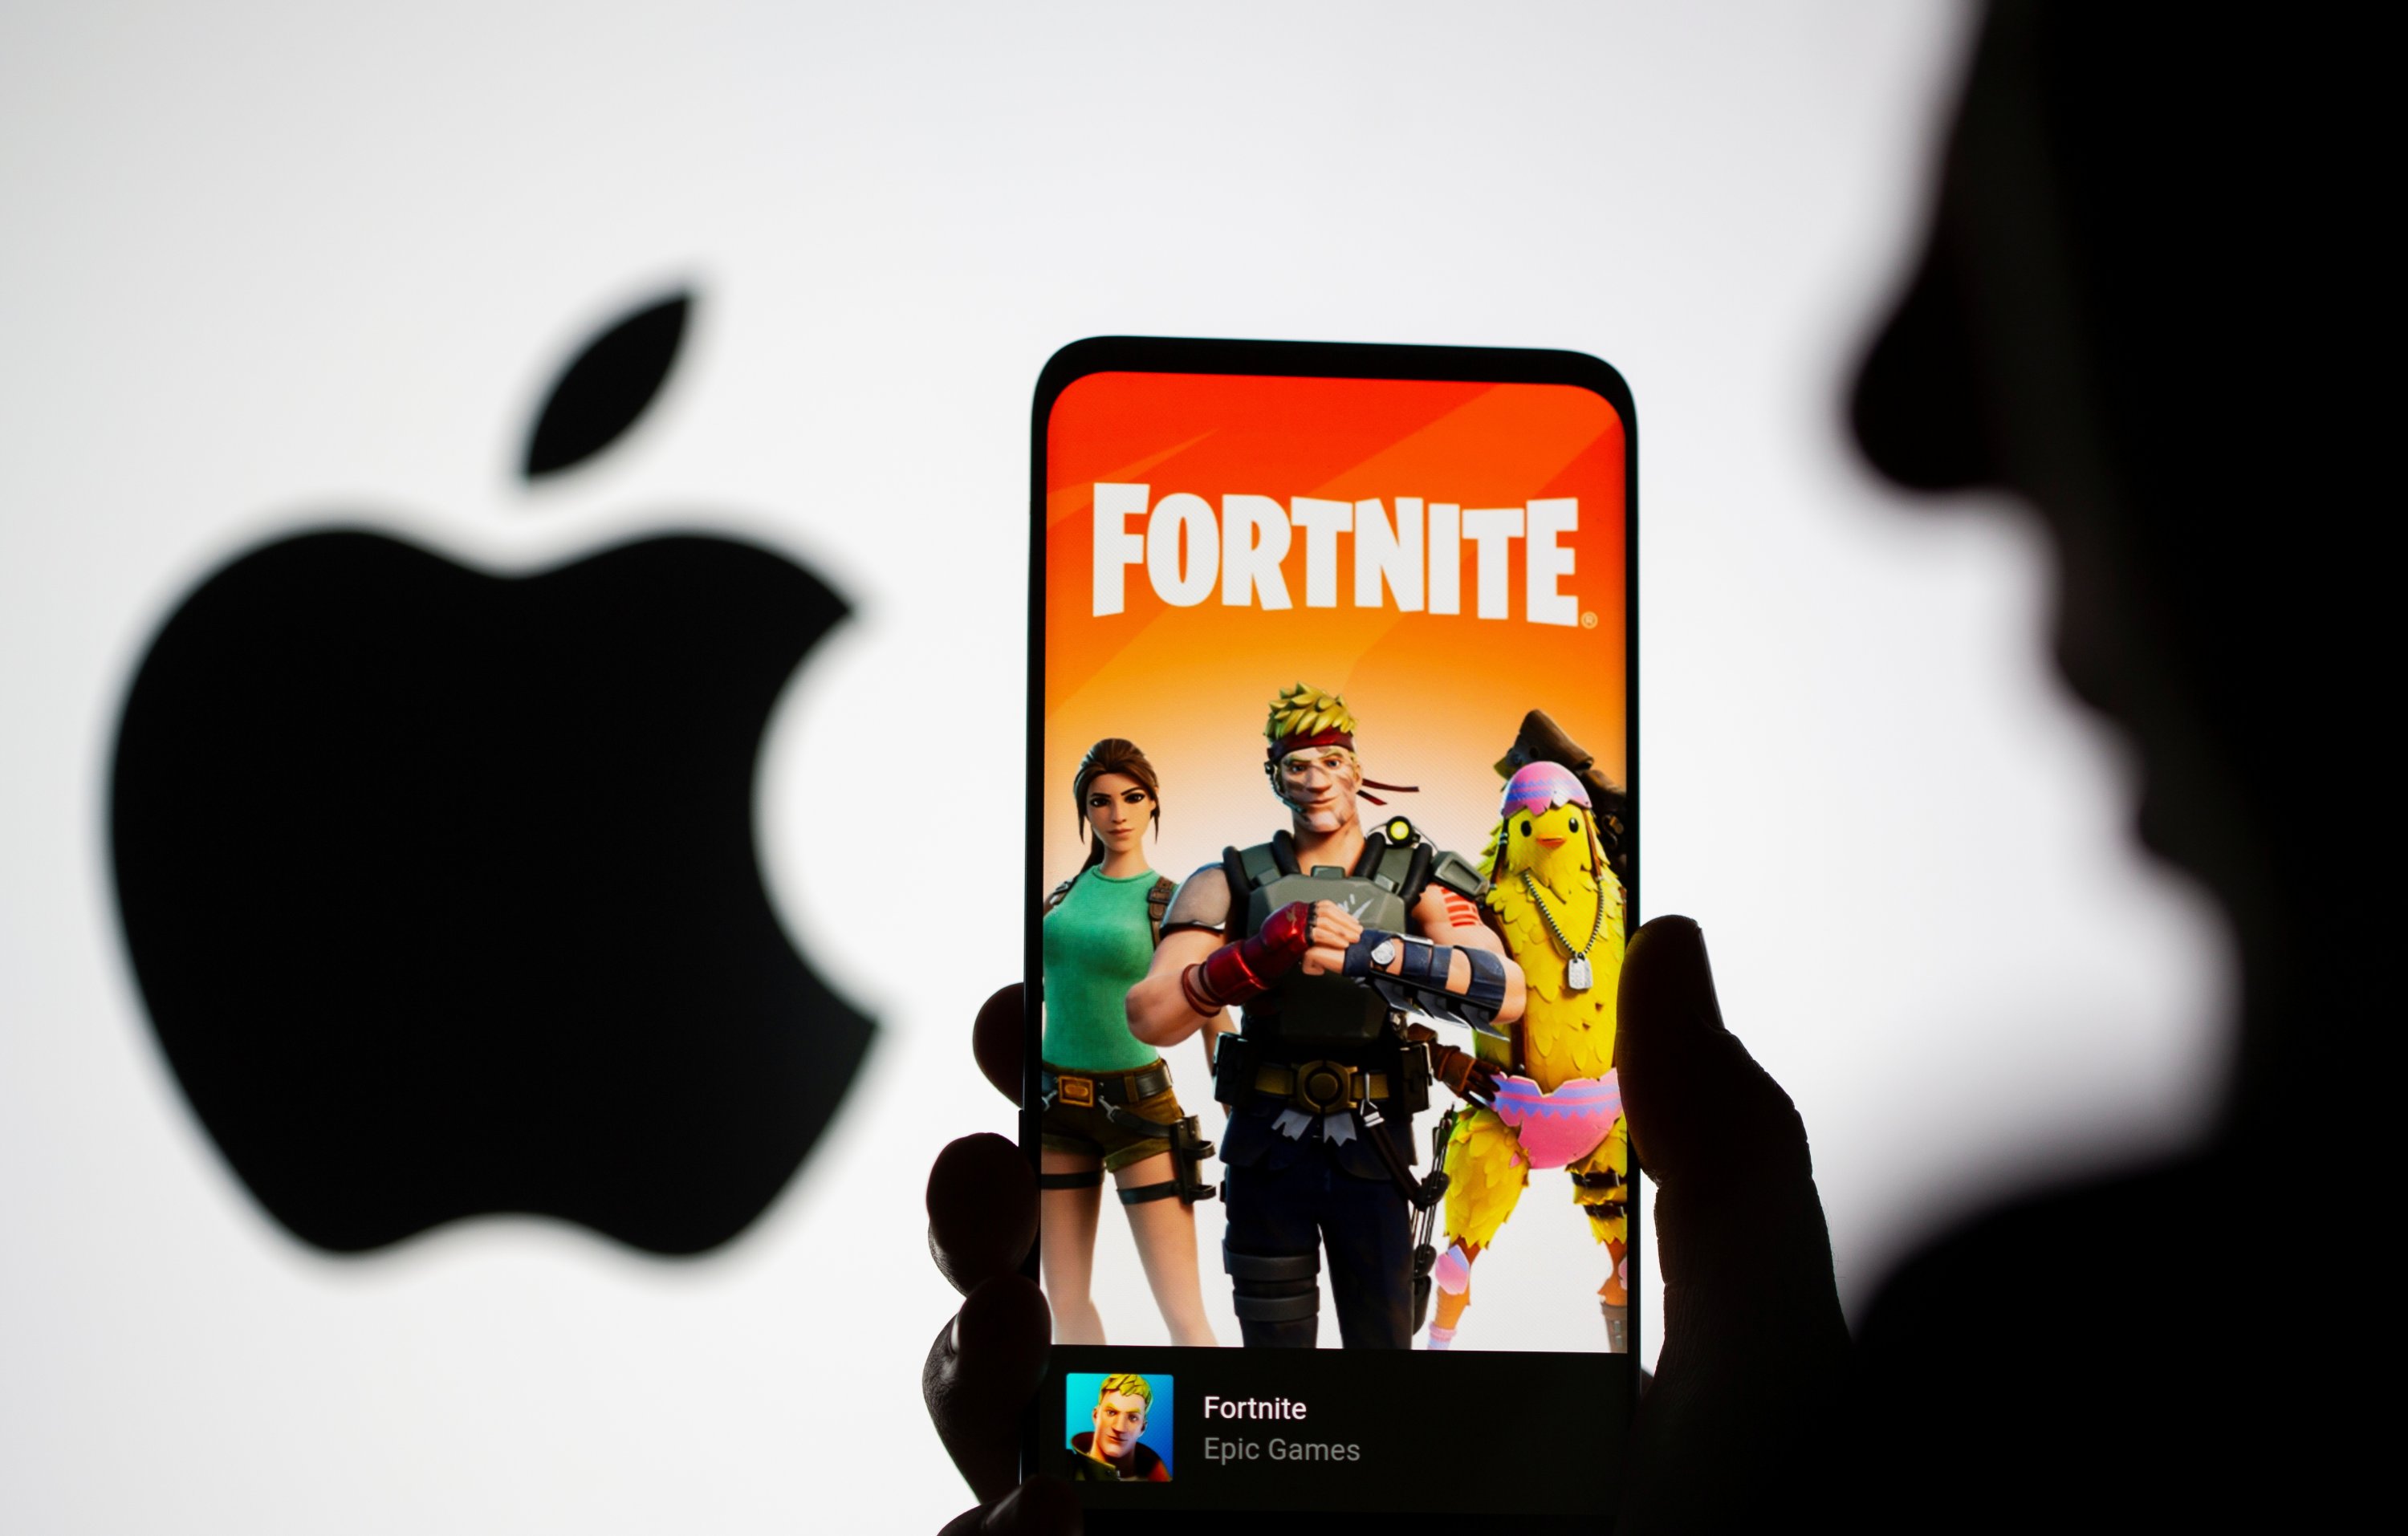 Apple expels Fortnite from the App Store; Epic Games sues